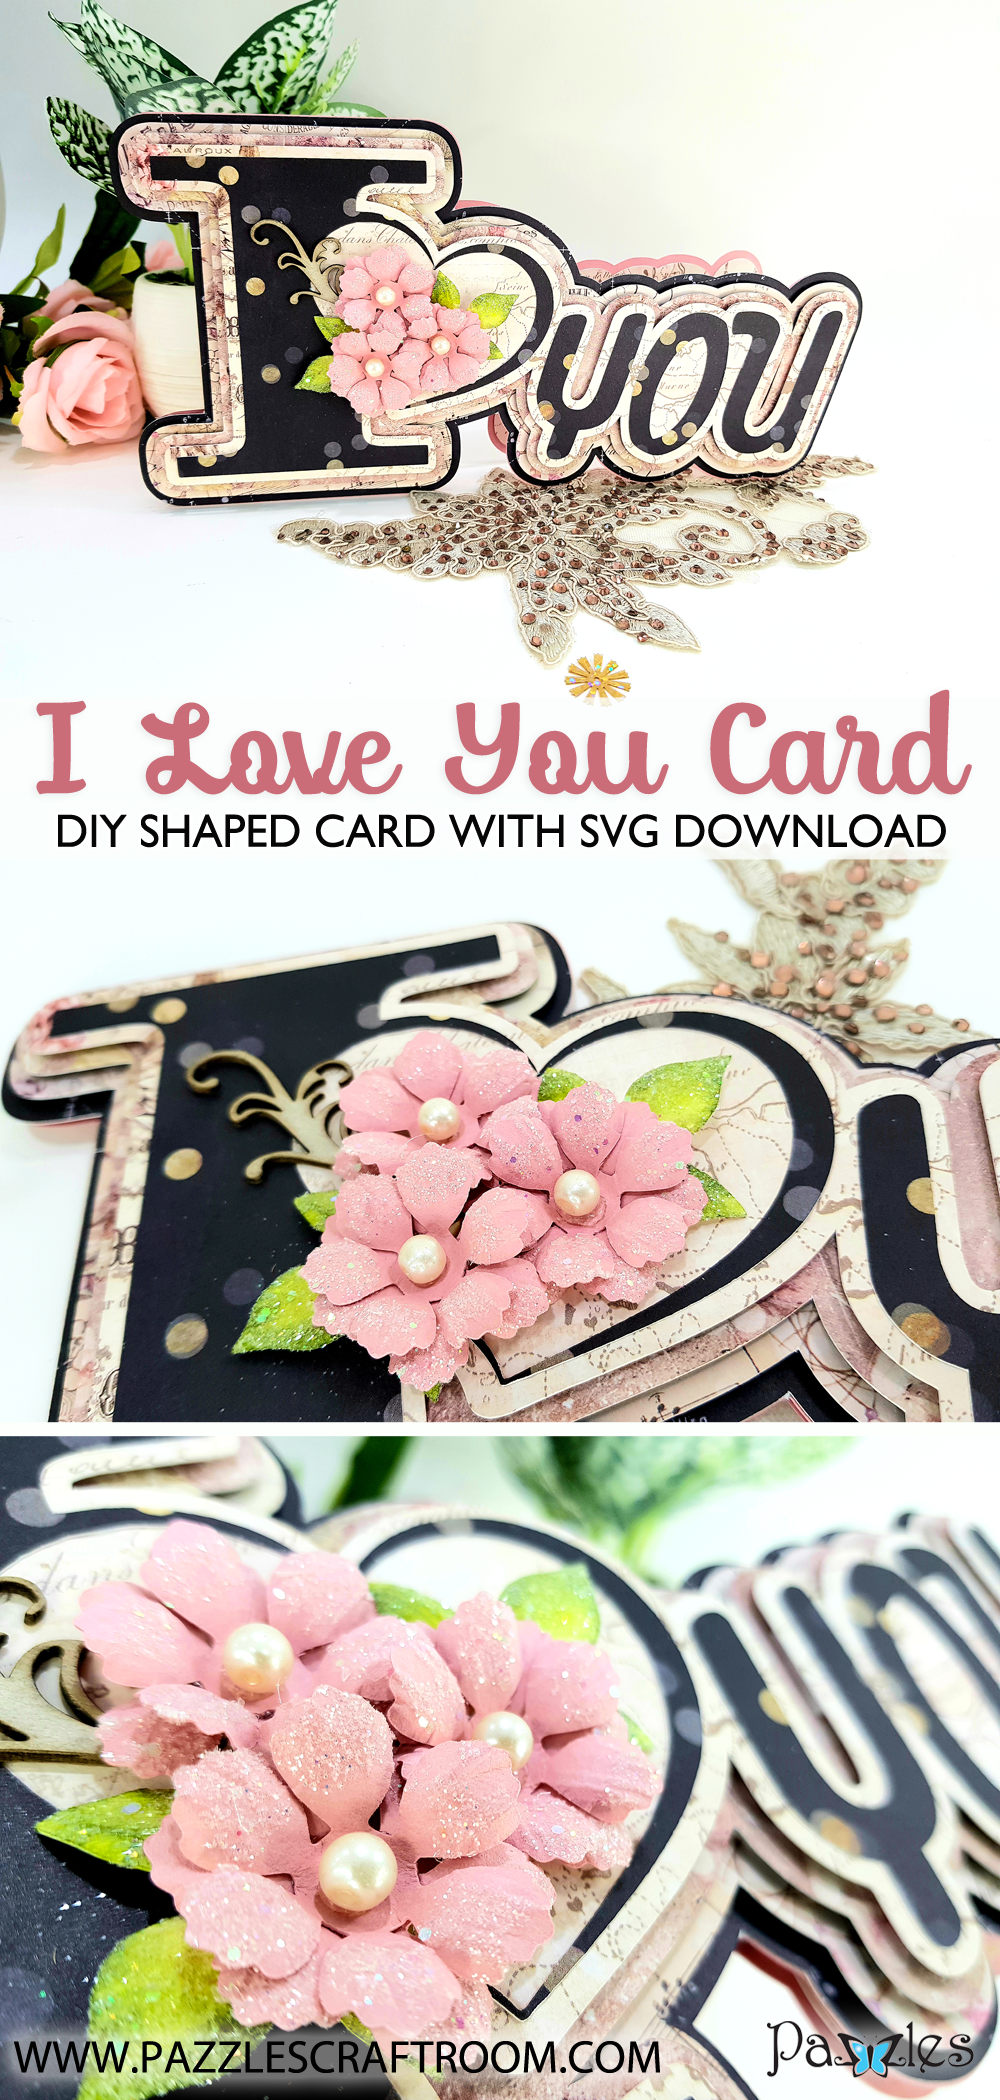 Pazzles DIY I Love You Shaped Card with instant SVG download. Compatible with all major electronic cutters including Pazzles Inspiration, Cricut, and Silhouette. Design by Nida Tanweer.